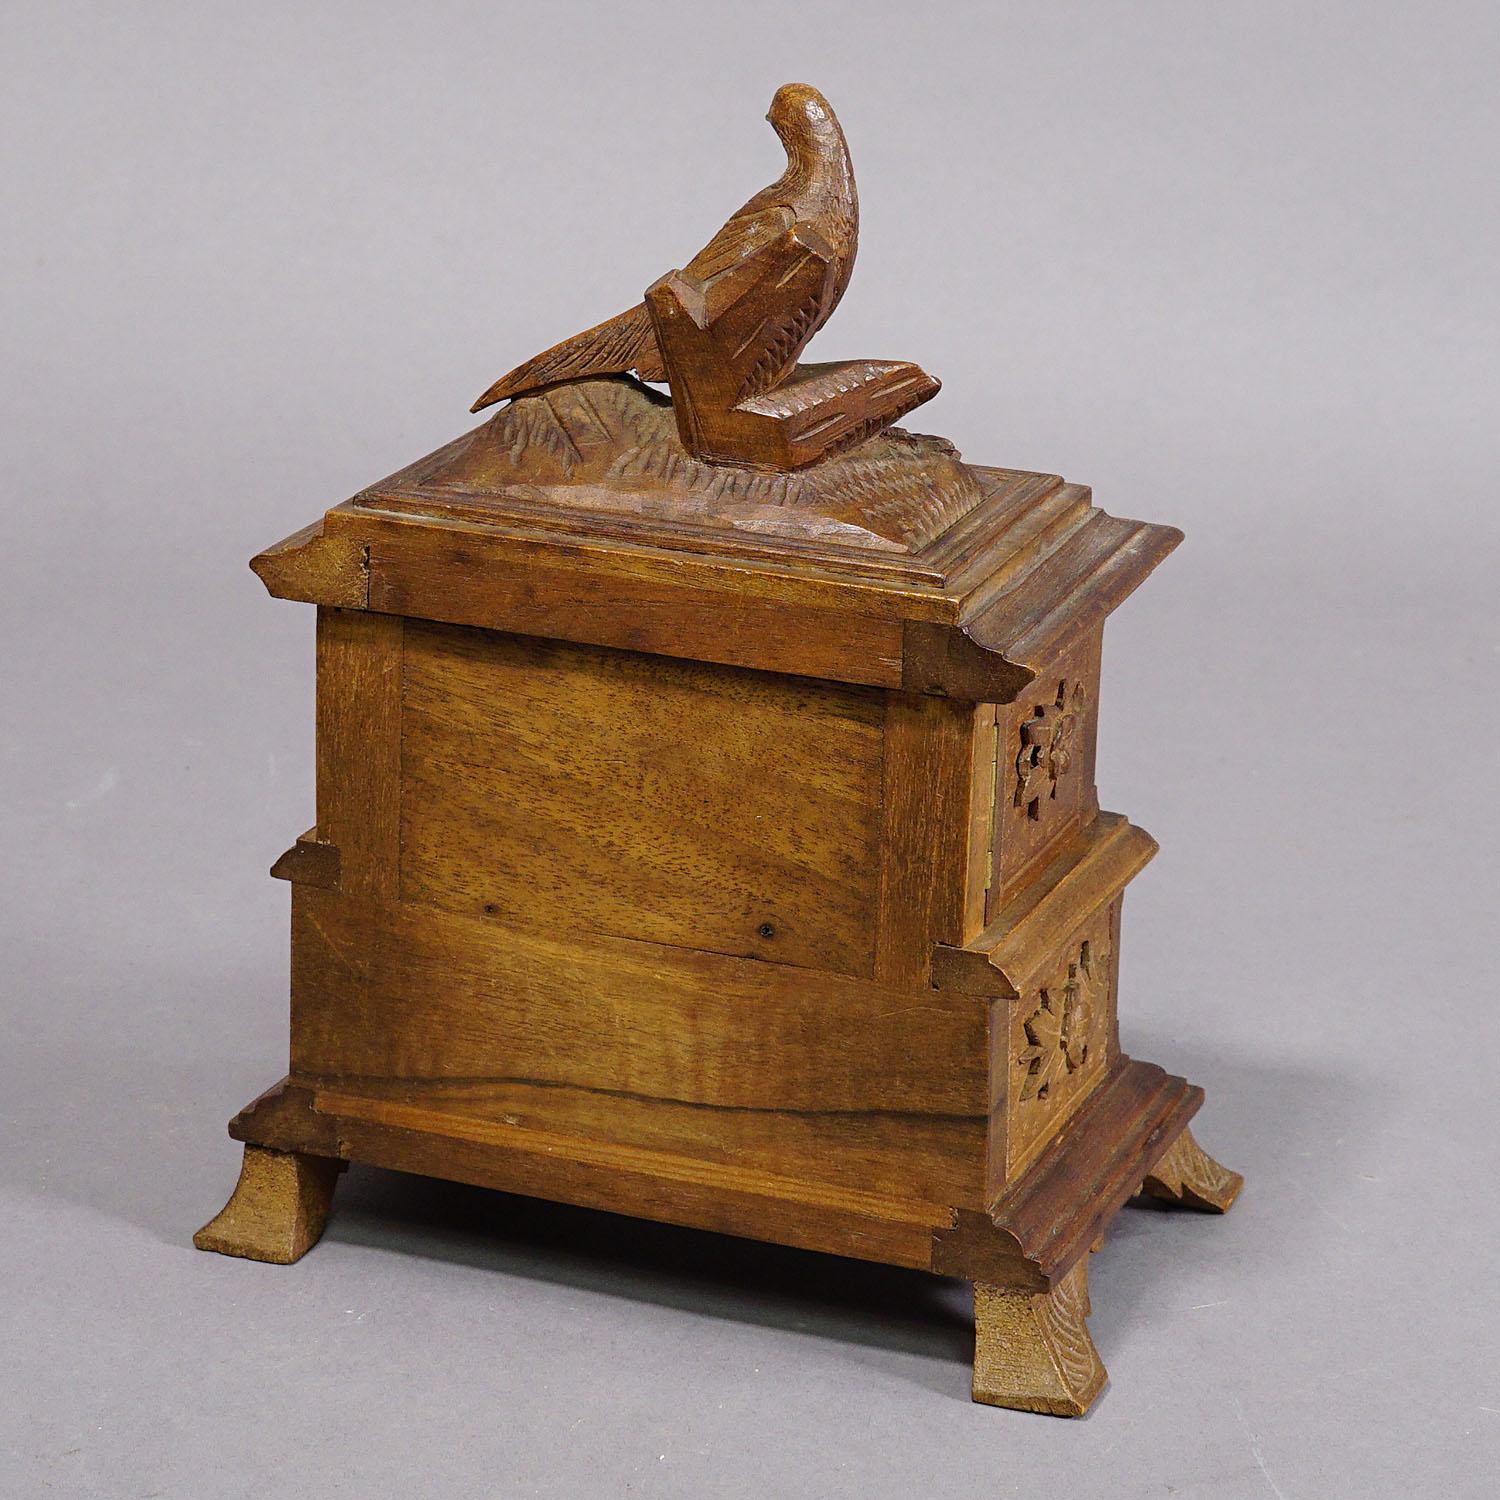 Swiss Antique Wooden Carved Edelweis Jewelry Box with Bird, Brienz ca 1900